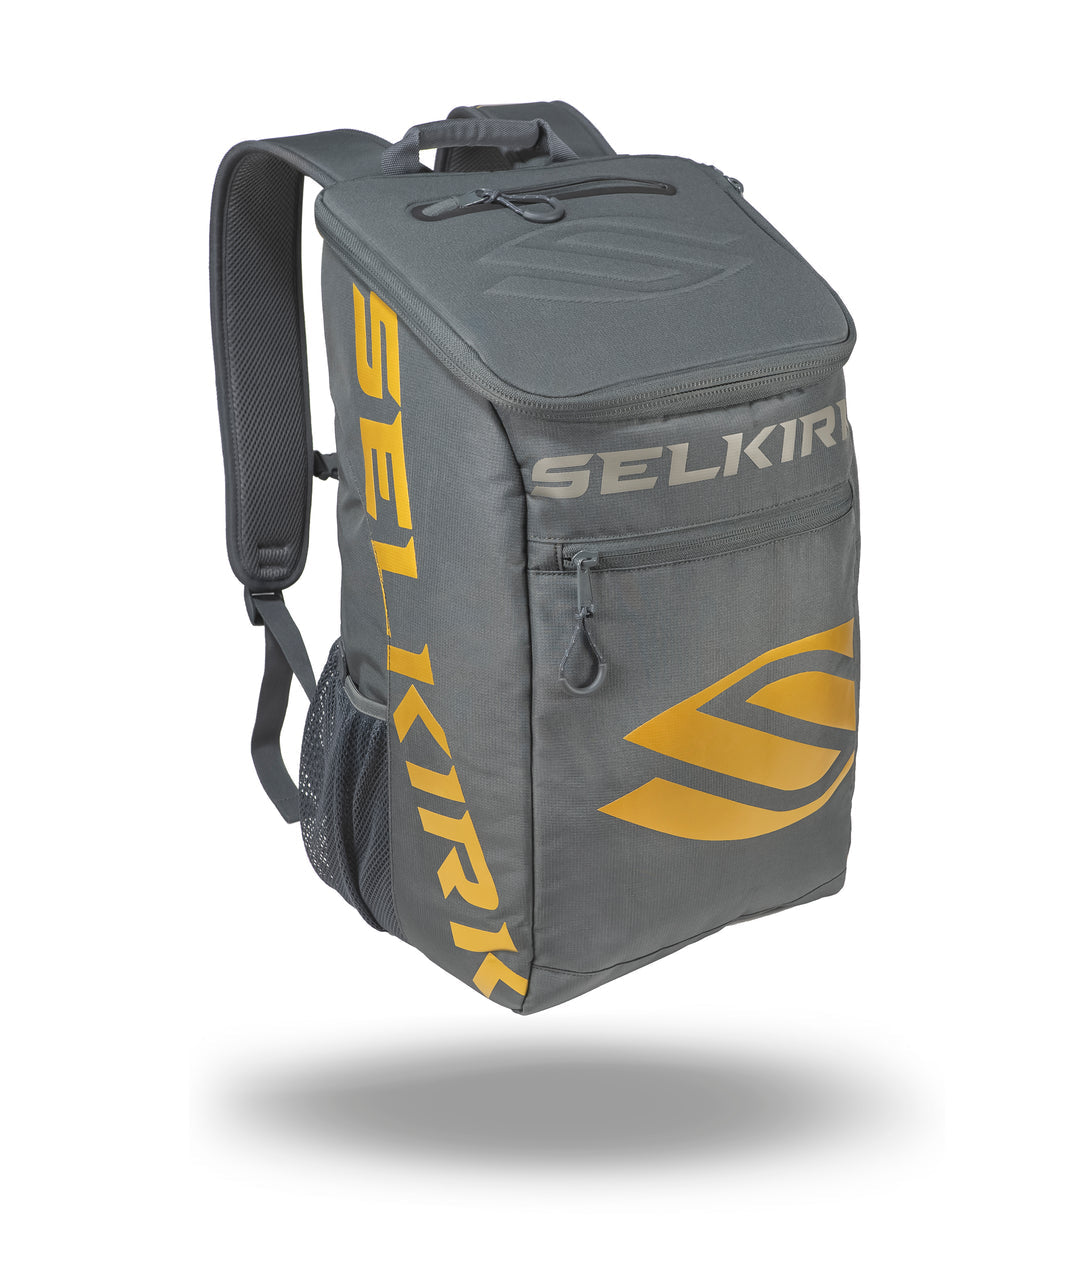 A grey and yellow Selkirk Team Backpack (2021) Pickleball Bag with the word Selkirk on it.